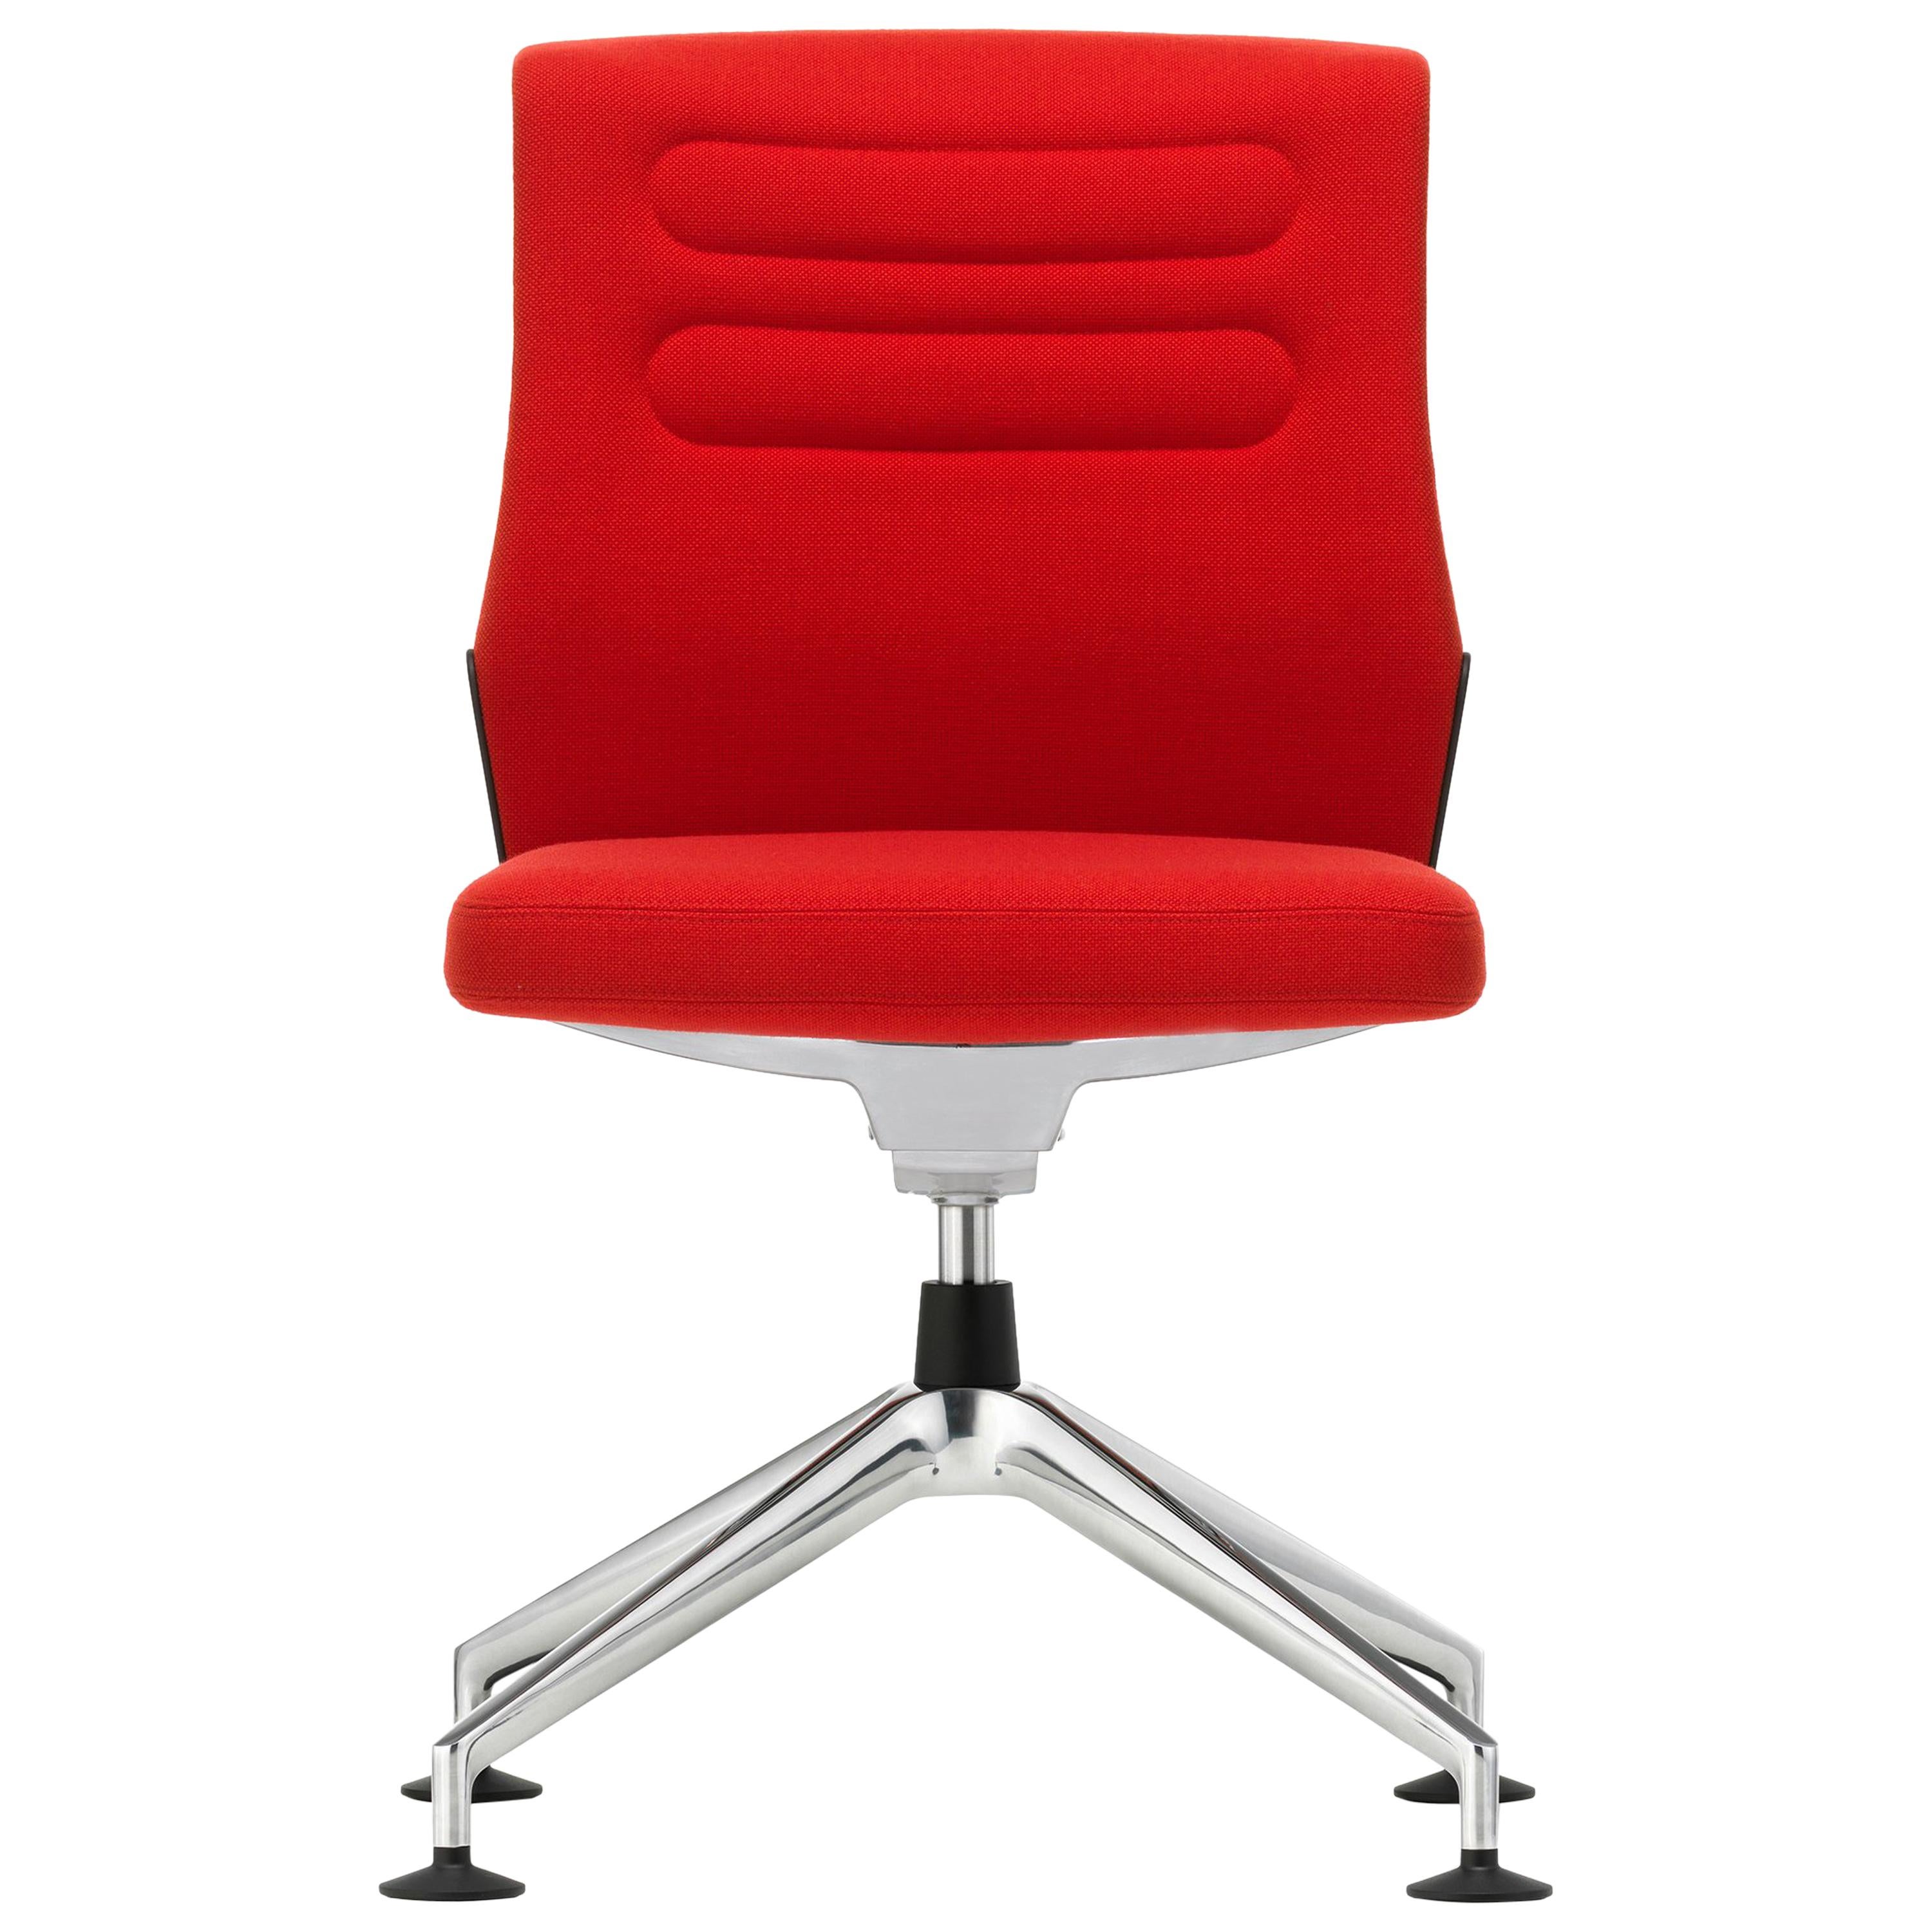 Vitra AC 5 Meet Chair in Poppy Red Plano by Antonio Citterio For Sale